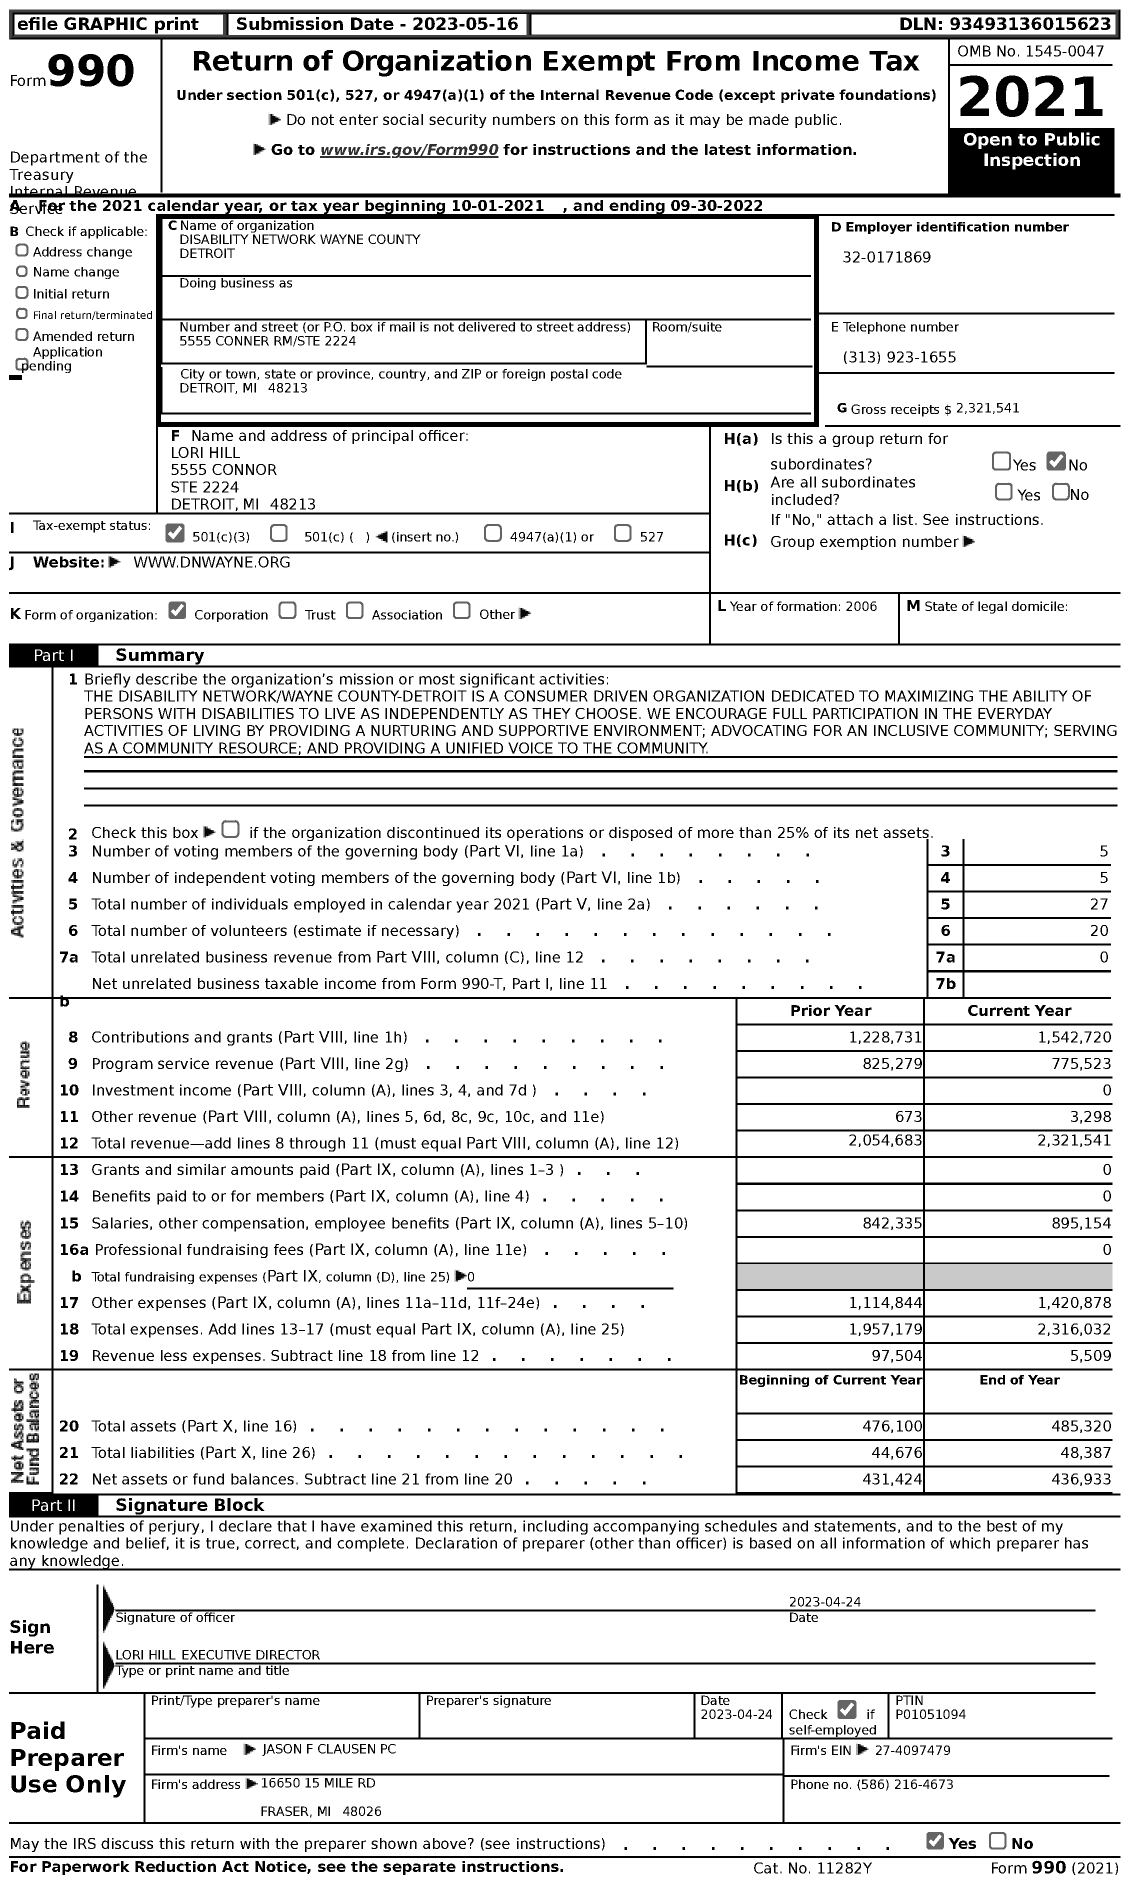 Image of first page of 2021 Form 990 for Disability Network Wayne County Detroit